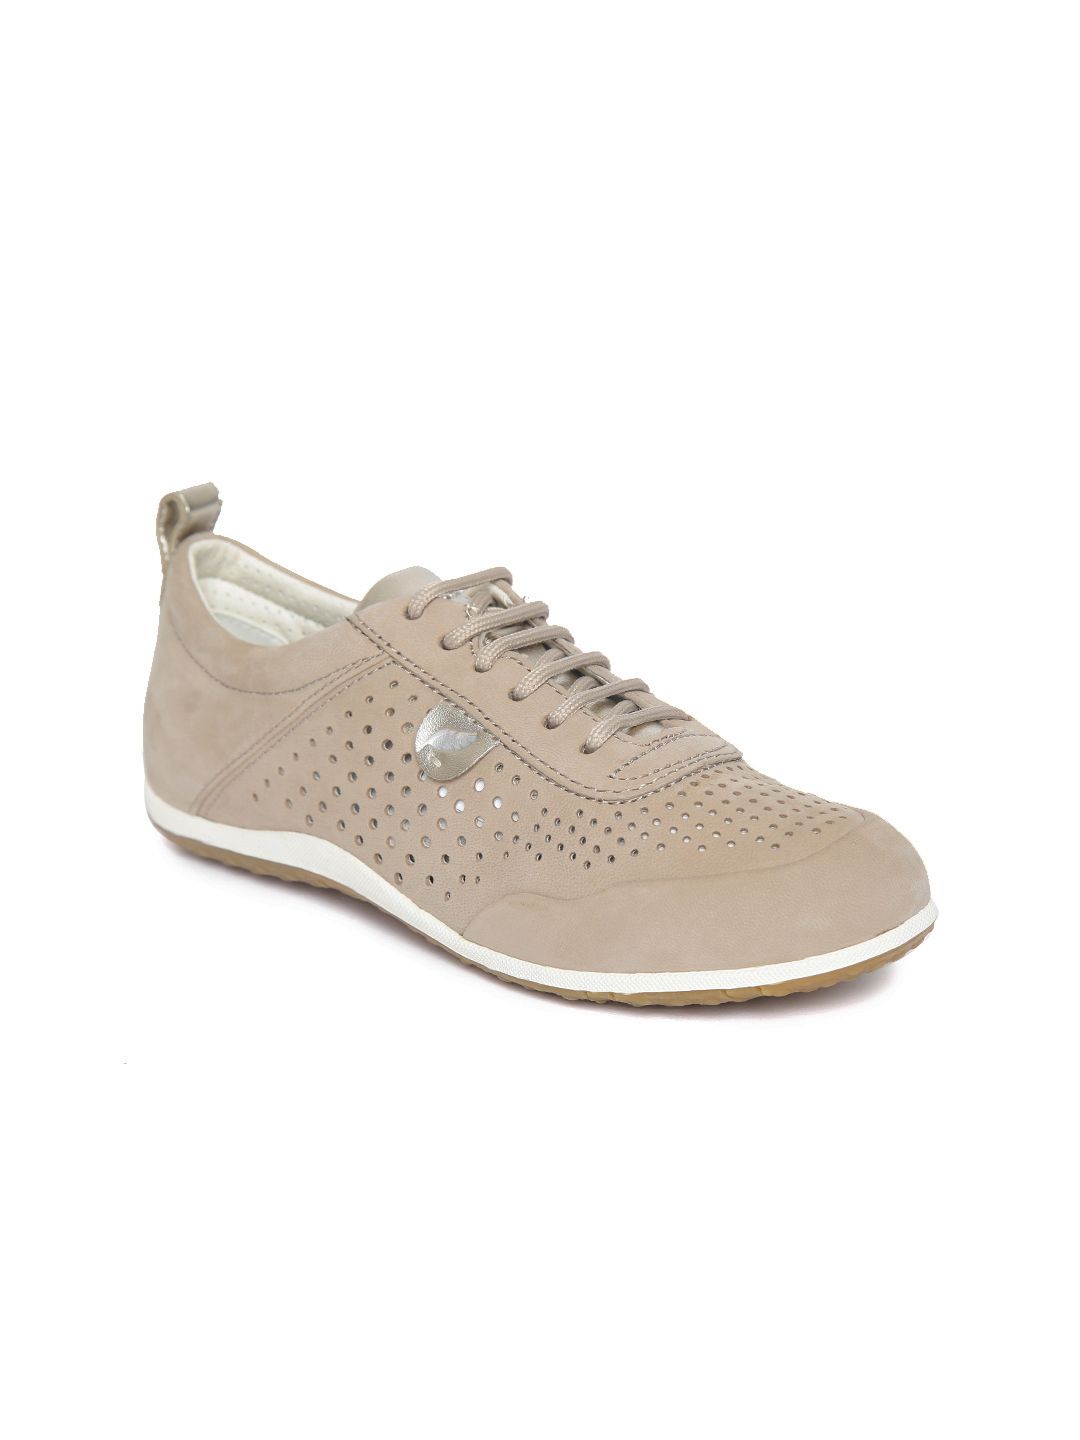 Geox Women Beige Perforated Leather Sneakers Price in India